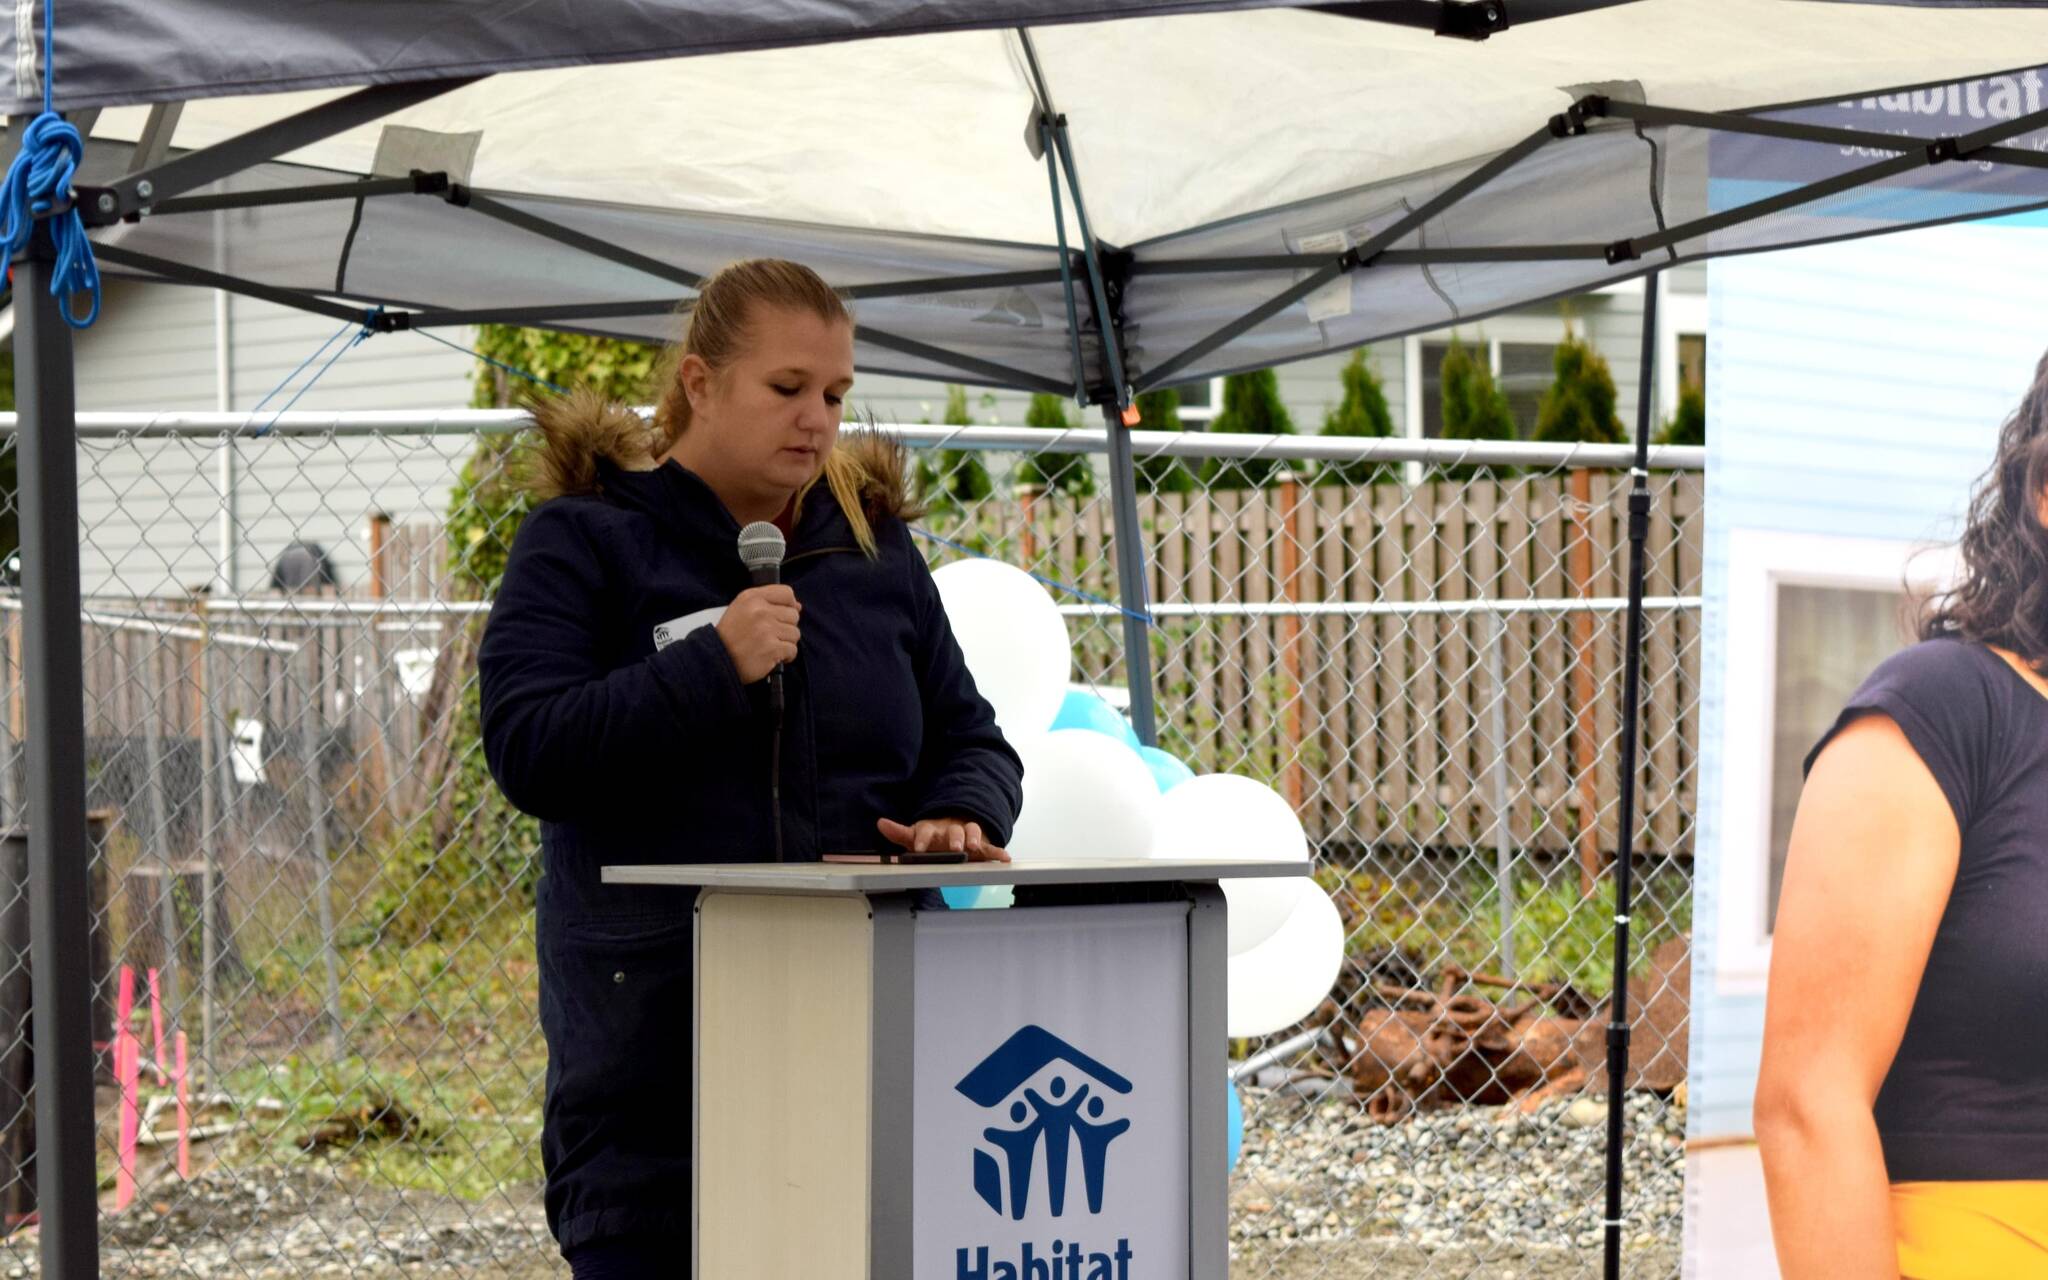 Photo by Conor Wilson/Valley Record
Nicole Evans-Stanley, a Habitat for Humanity homeowner, gives a speech at the Habitat groundbreaking Sept. 28 in North Bend.